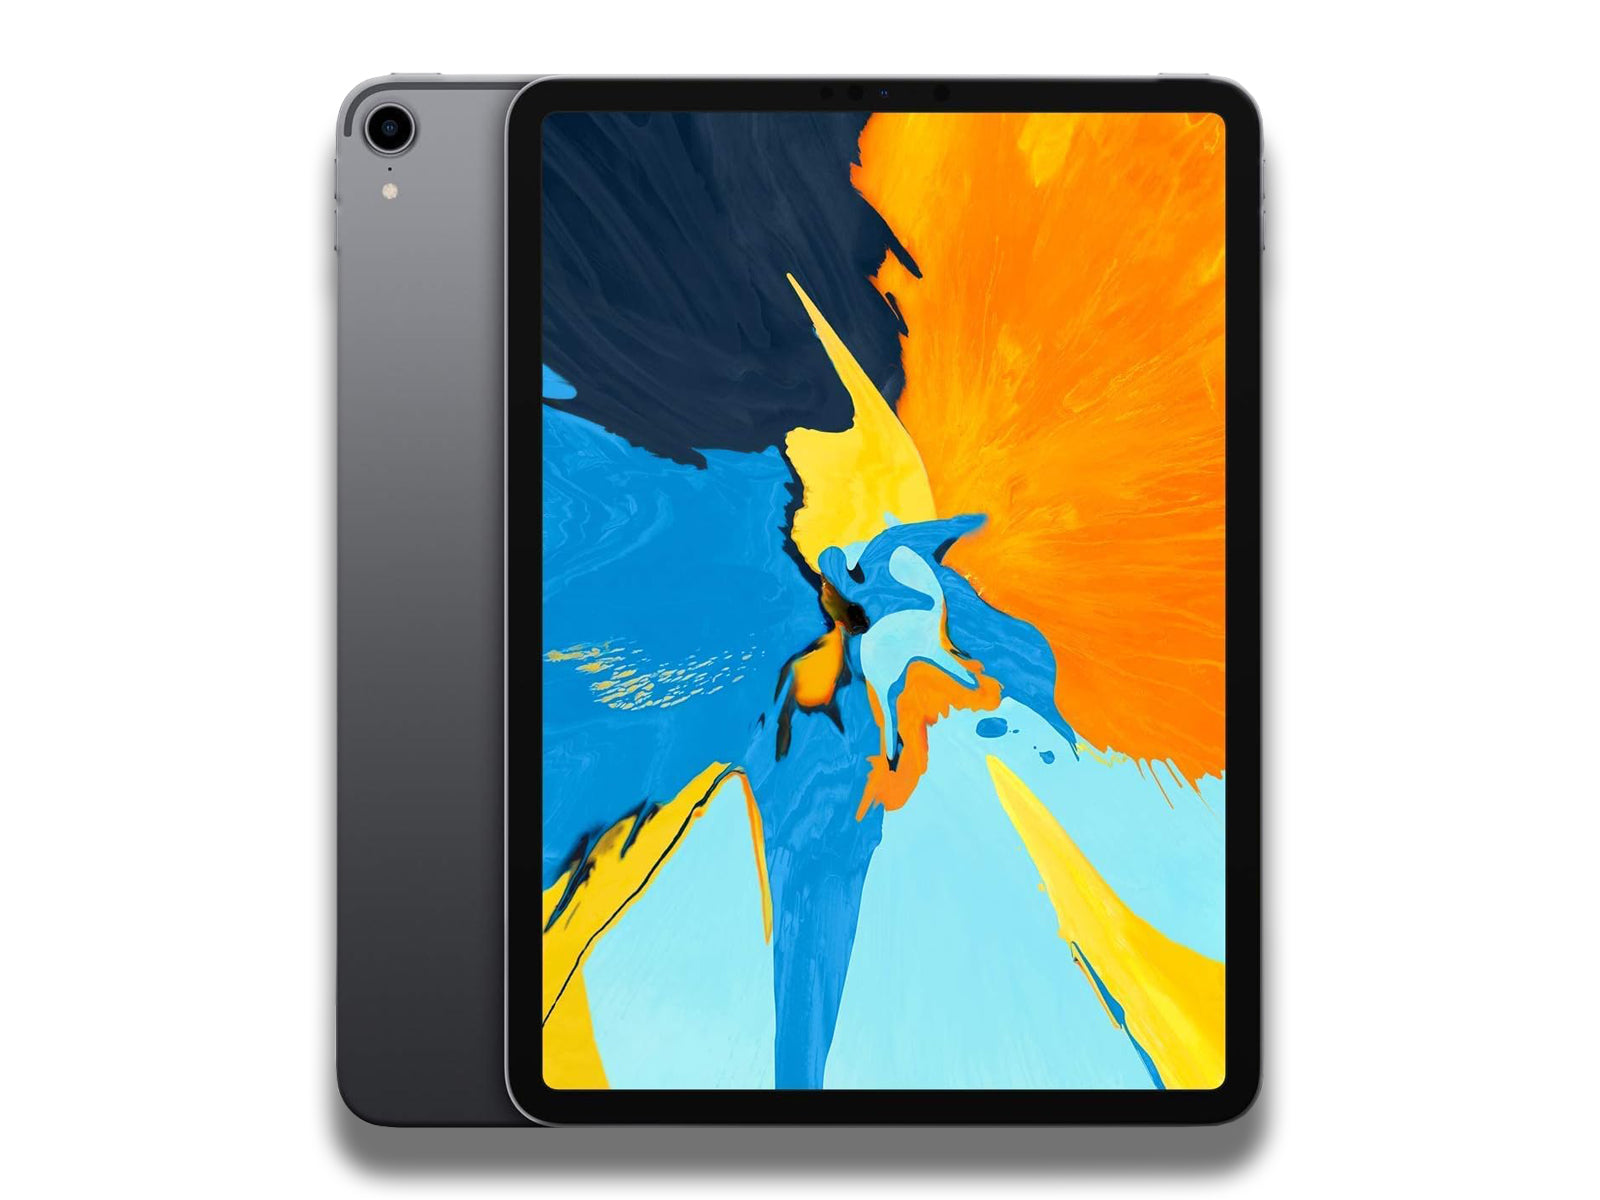 Image shows the front and back of the space grey Apple iPad Pro 11-inch 1st Generation 